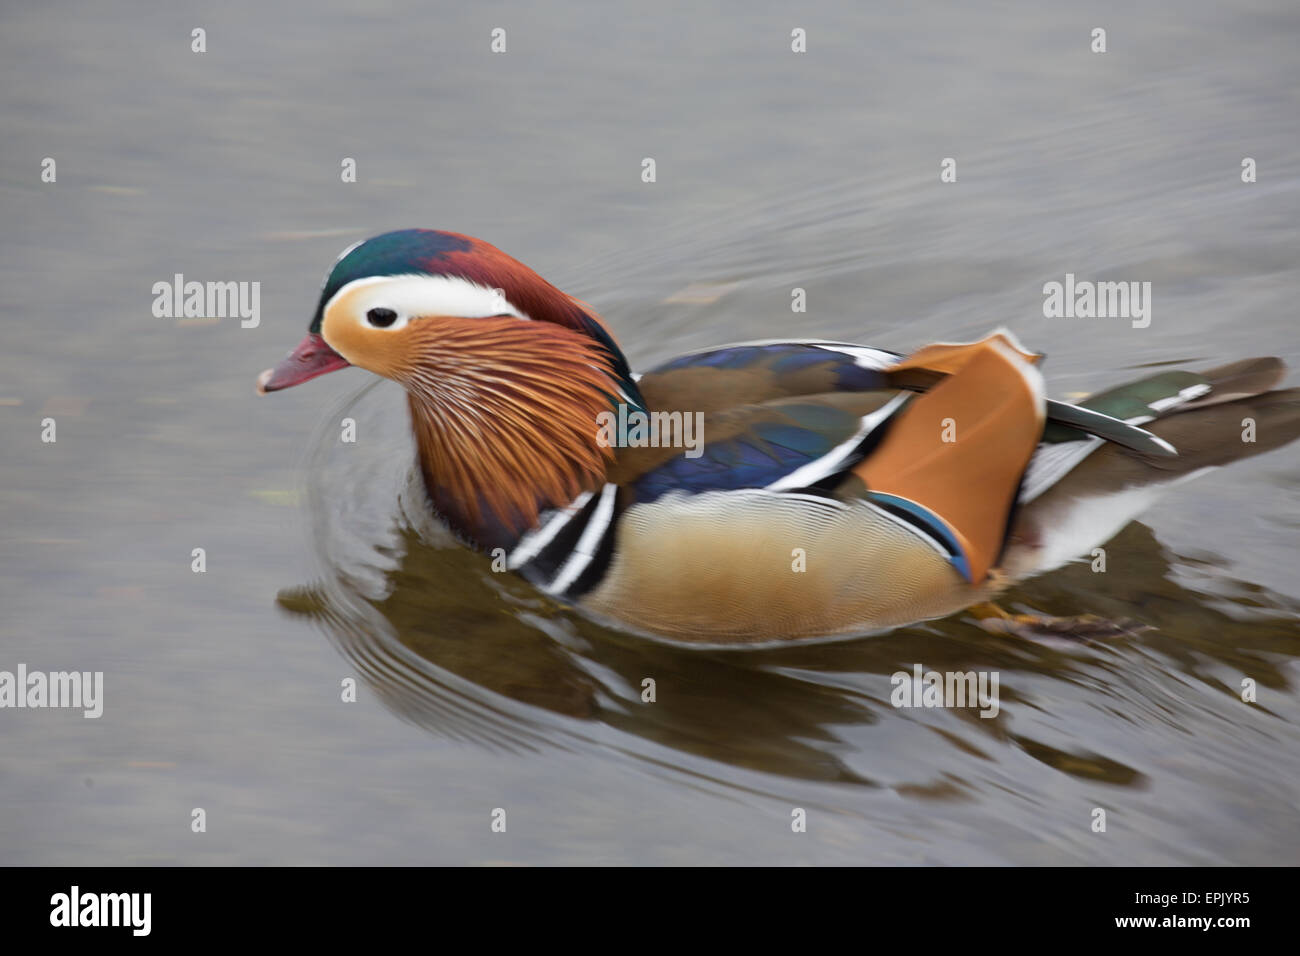 alone, animal, attractive, beutiful, british, color, colorful, creative, david slater, duck, exotic, feathers, lake, male, mand Stock Photo